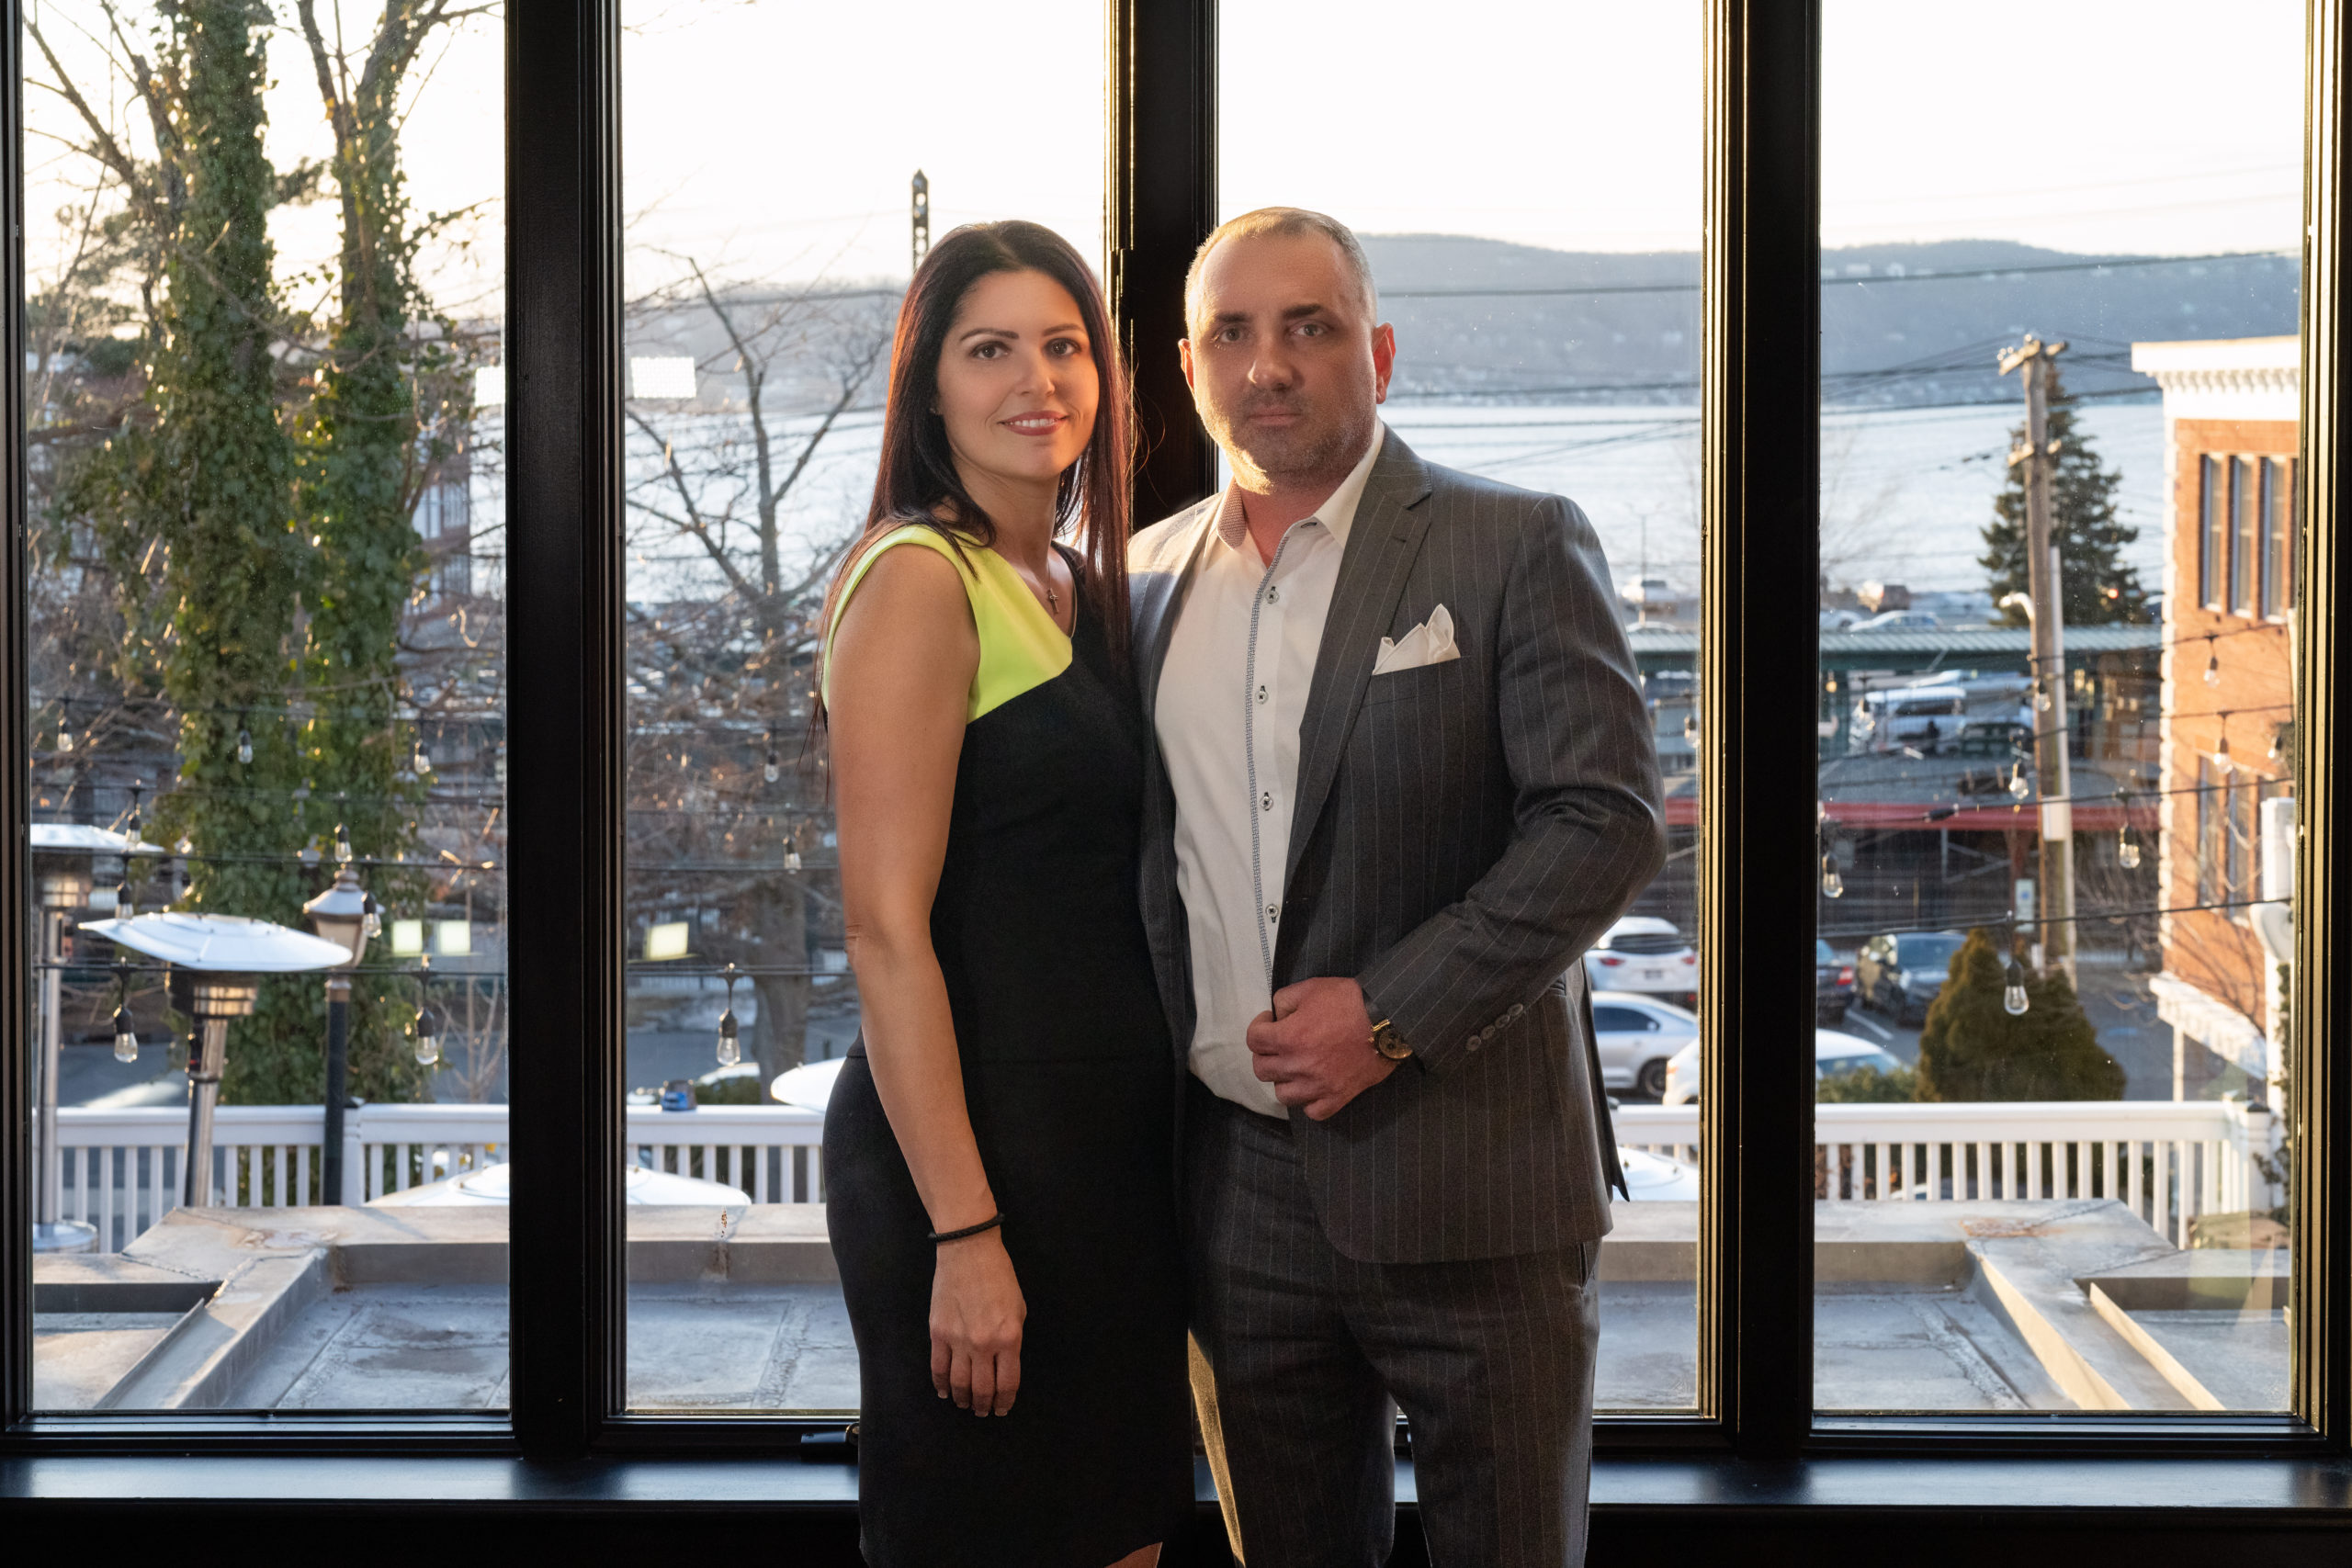 Successful Restaurateurs Launched During the Pandemic, Meet Gino and Floria Uli of Hudson Prime Steakhouse in NY